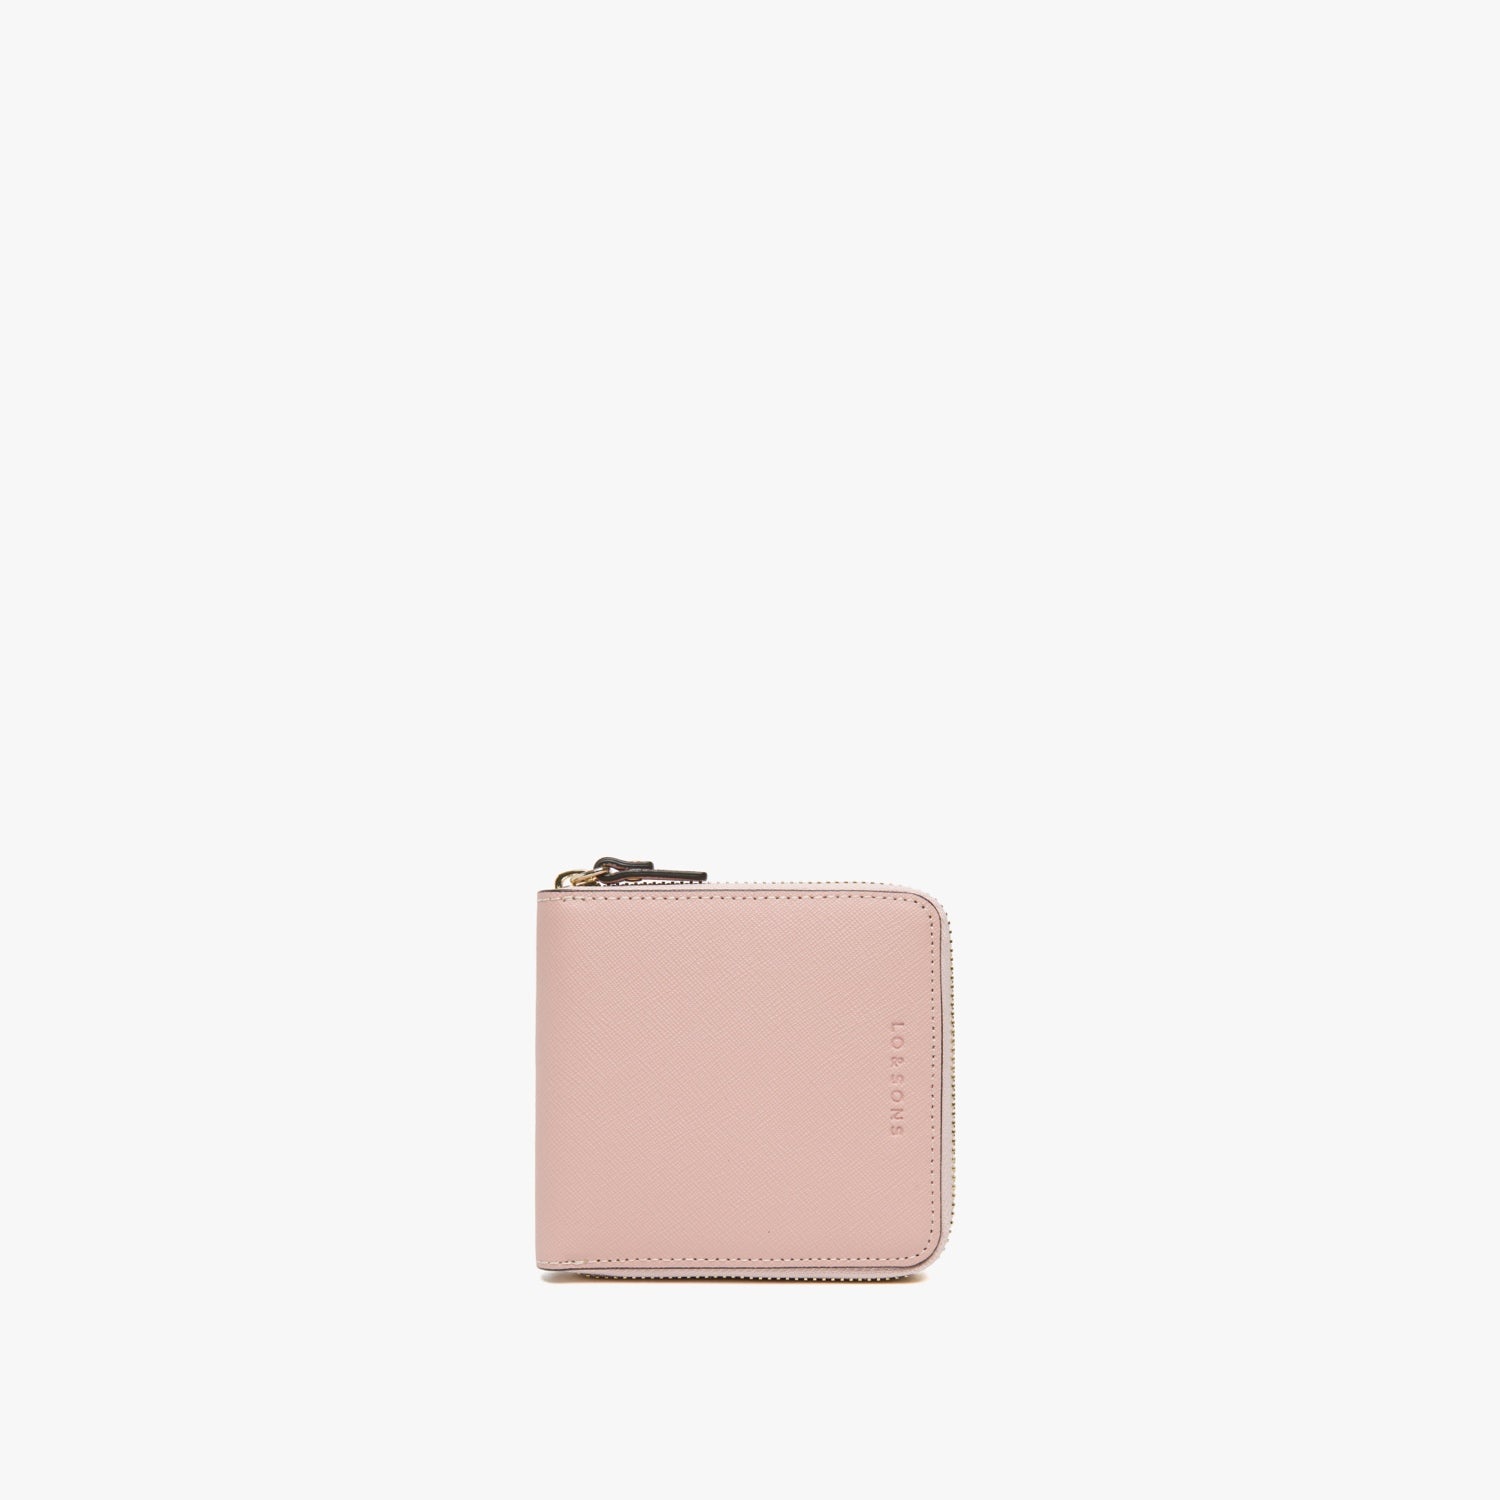 The Small Wallet - Saffiano Leather - Rose Quartz / Gold / Camel